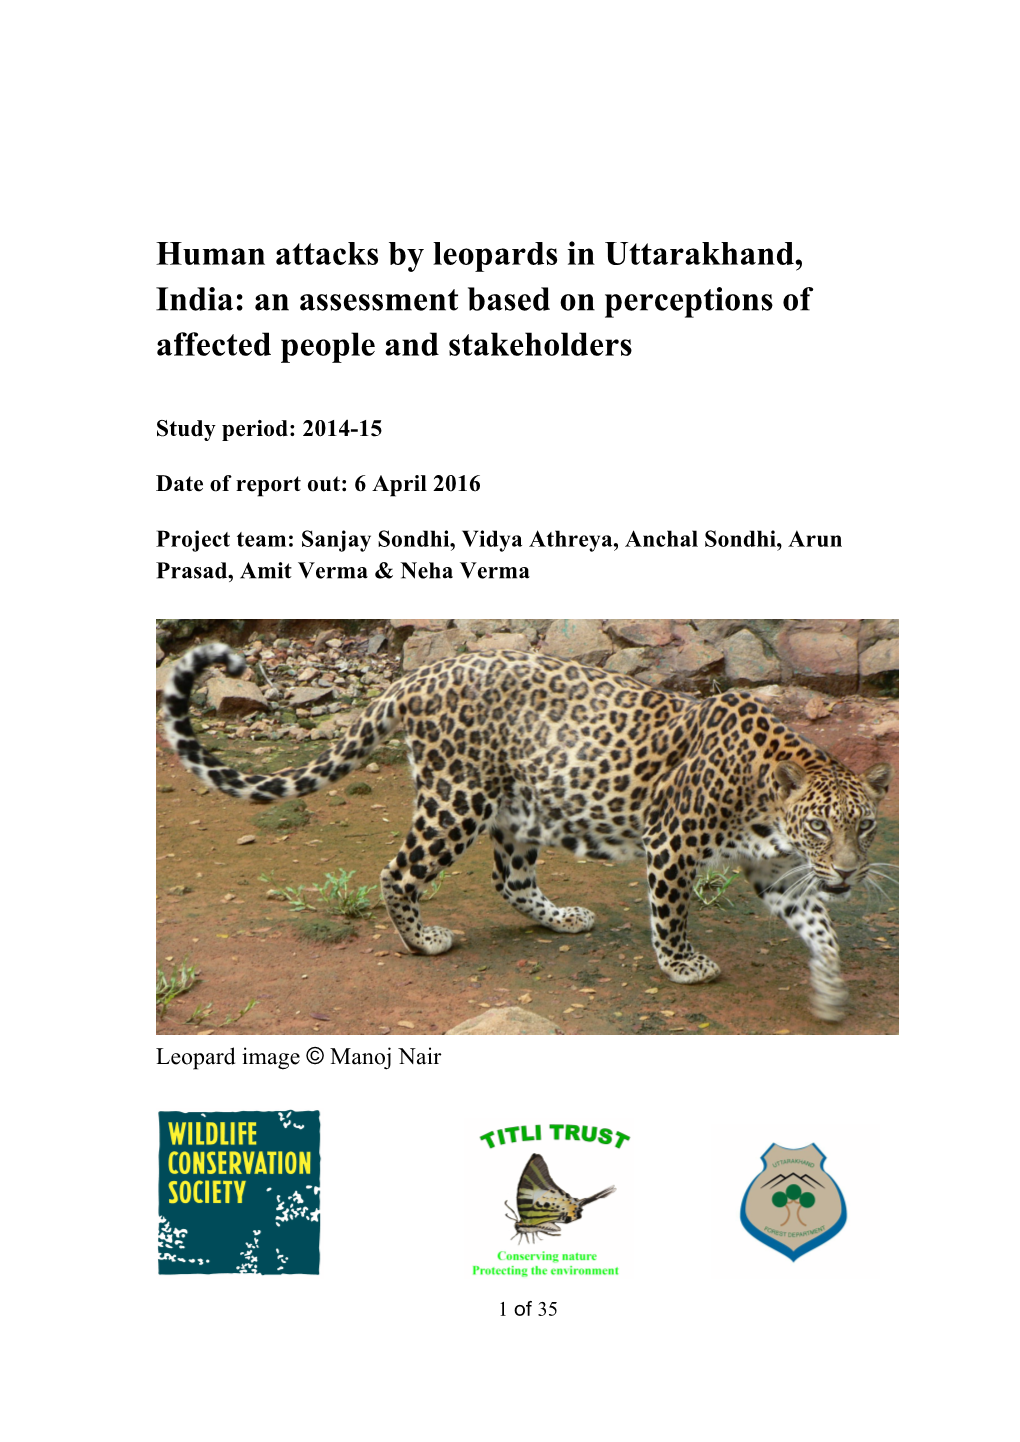 Human Attacks by Leopards in Uttarakhand, India: an Assessment Based on Perceptions of Affected People and Stakeholders